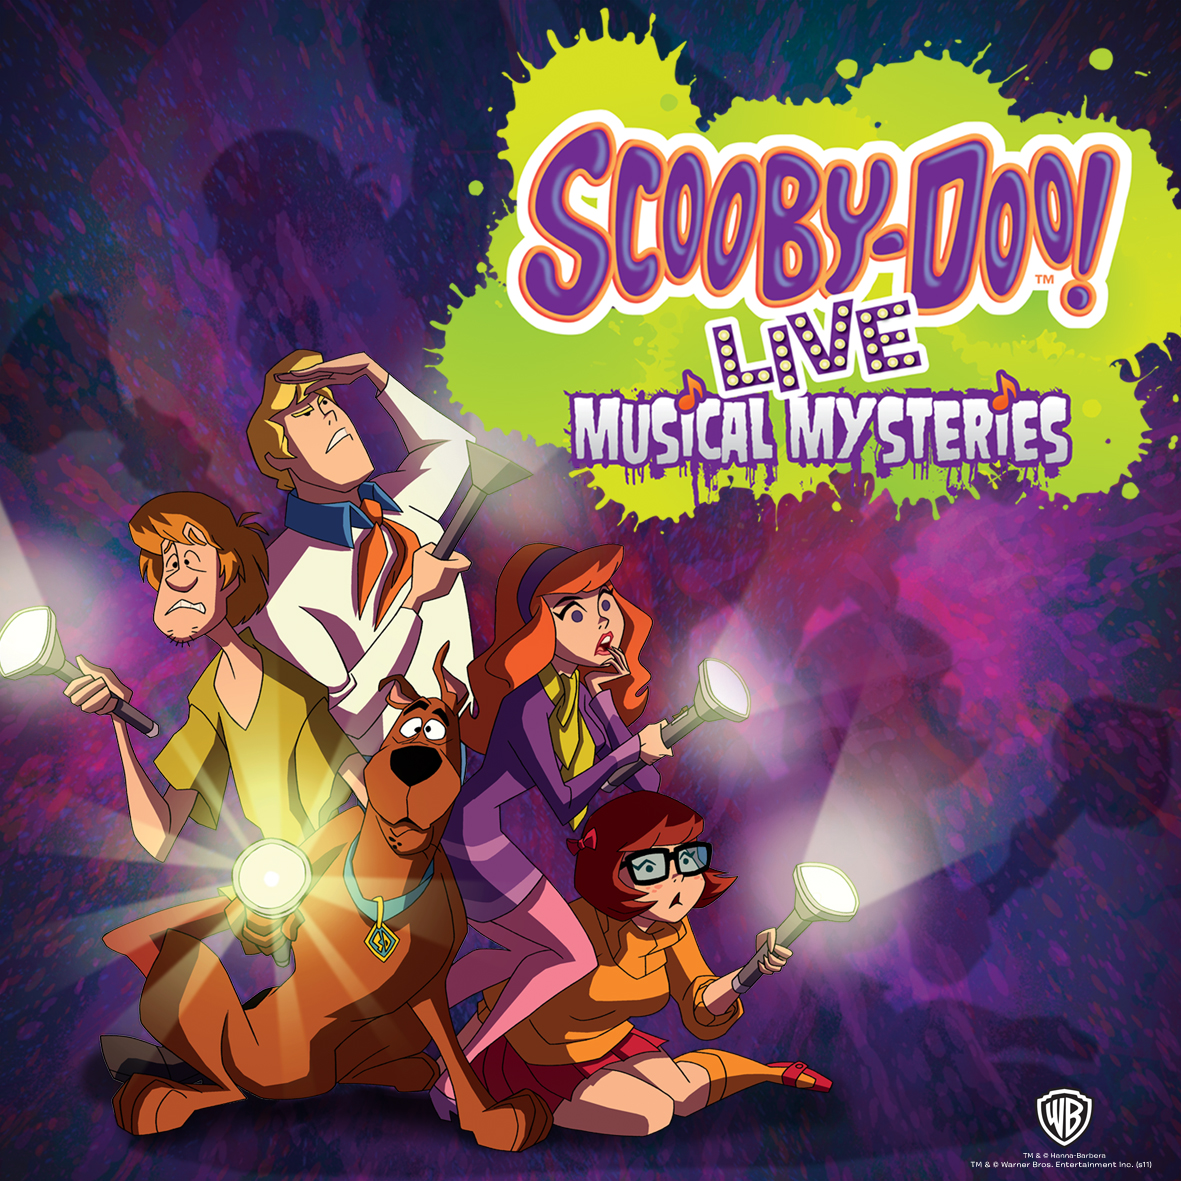 Scooby Doo Live Musical Mysteries HD Image Wallpaper For Galaxy